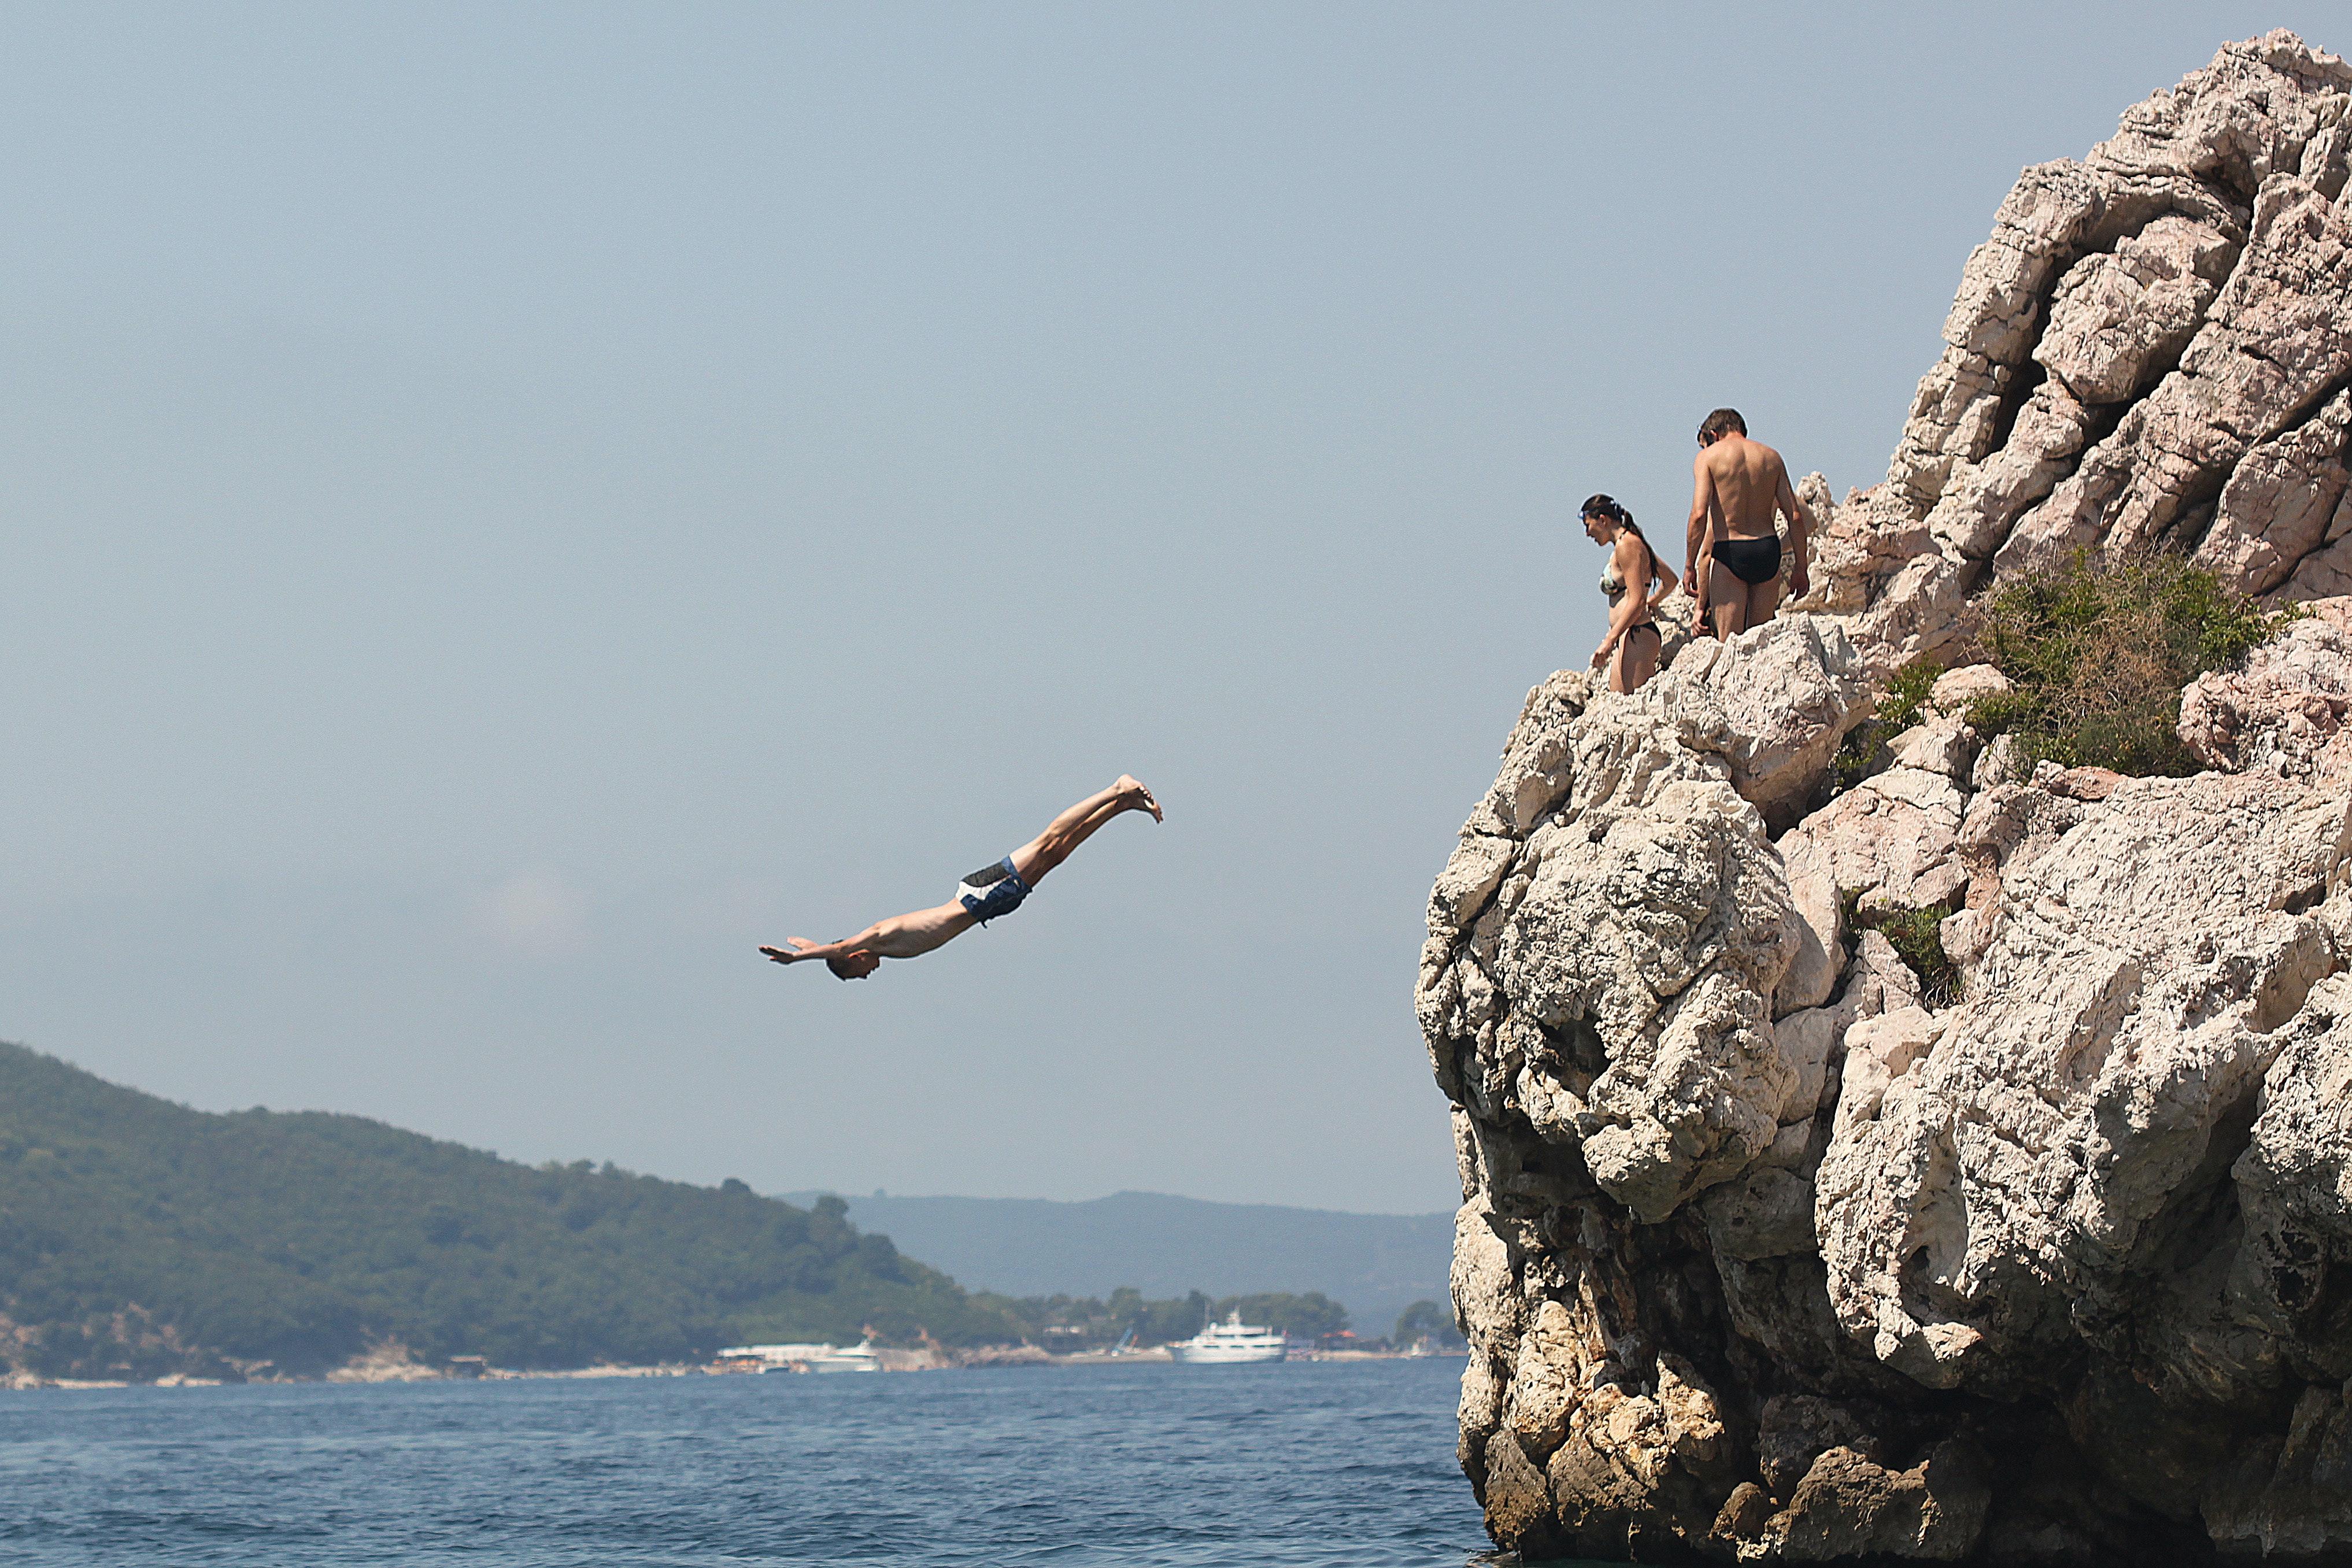 Cliff Diving Wallpapers - Top Free Cliff Diving Backgrounds ...